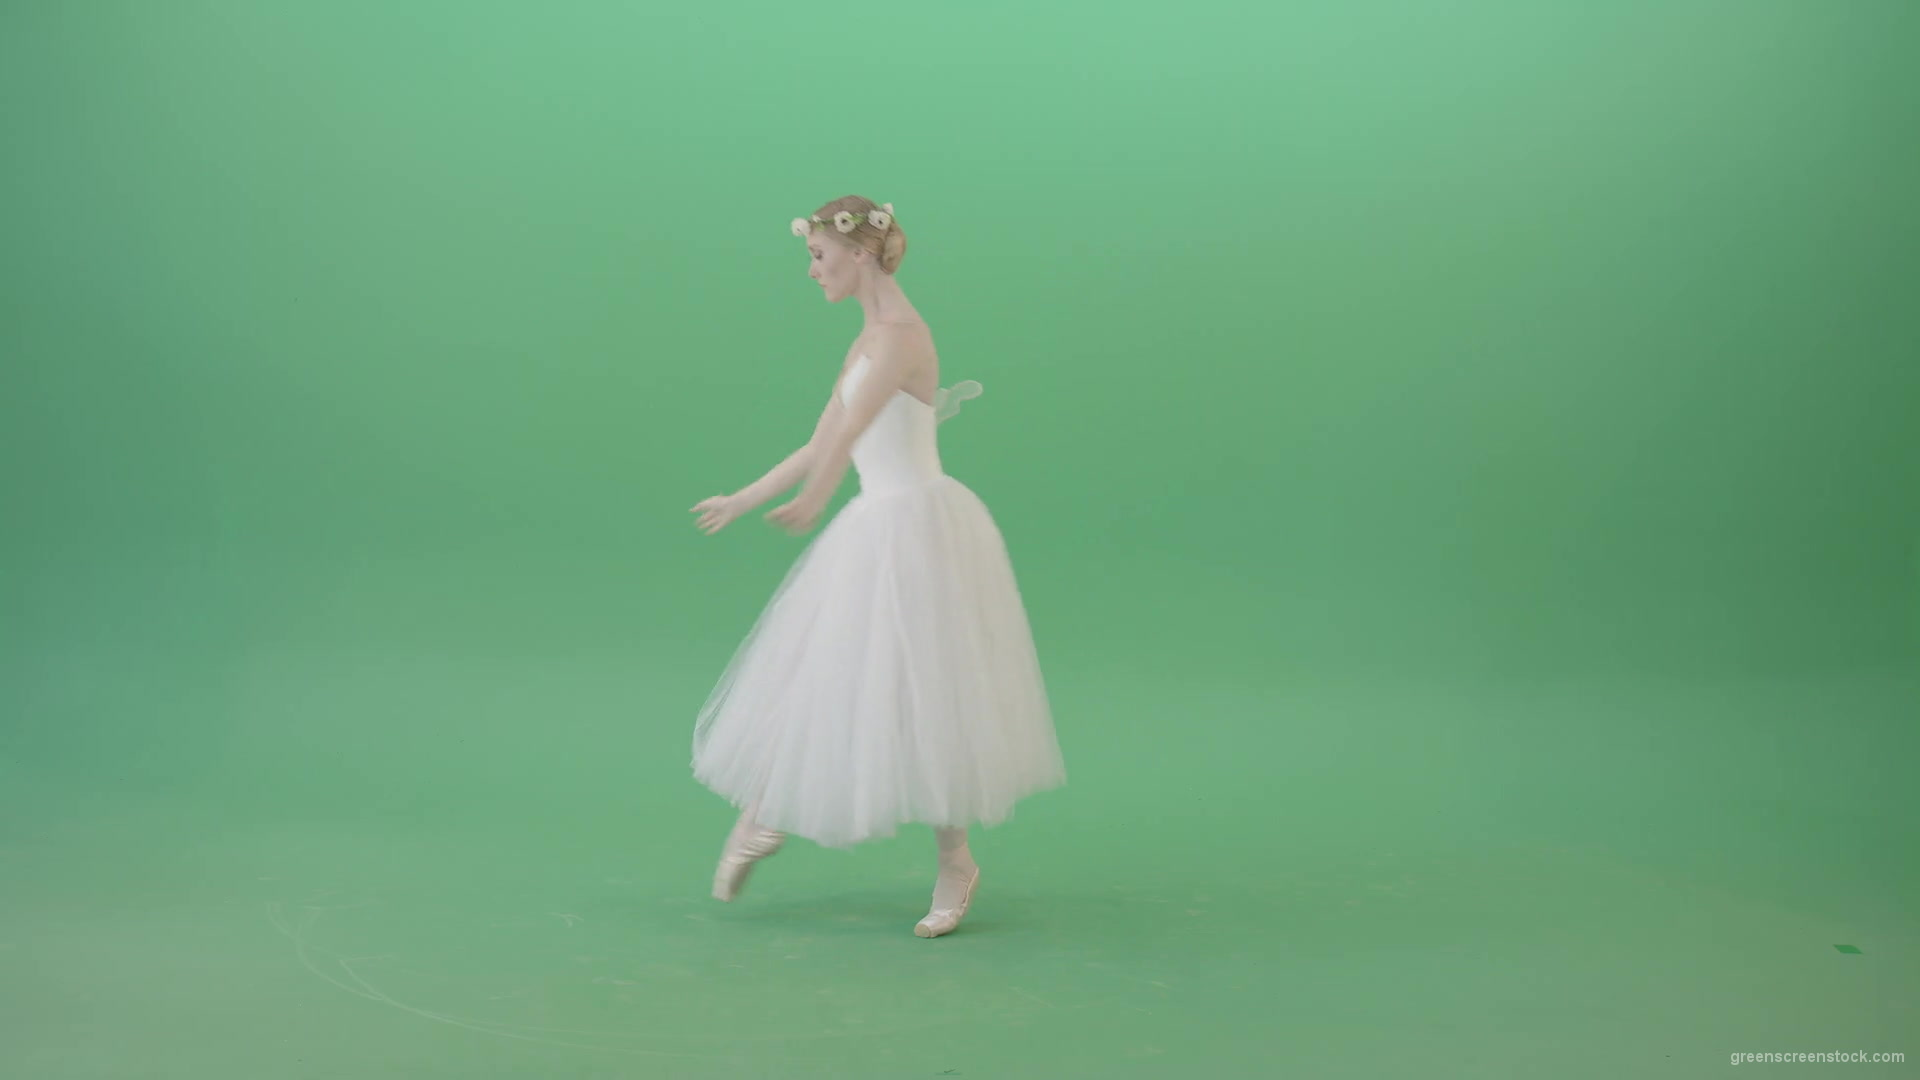 Blonde-Girl-in-elegant-white-wedding-dress-mowing-away-and-dancing-ballet-art-isolated-on-green-screen-4K-Video-Footage-1920_006 Green Screen Stock